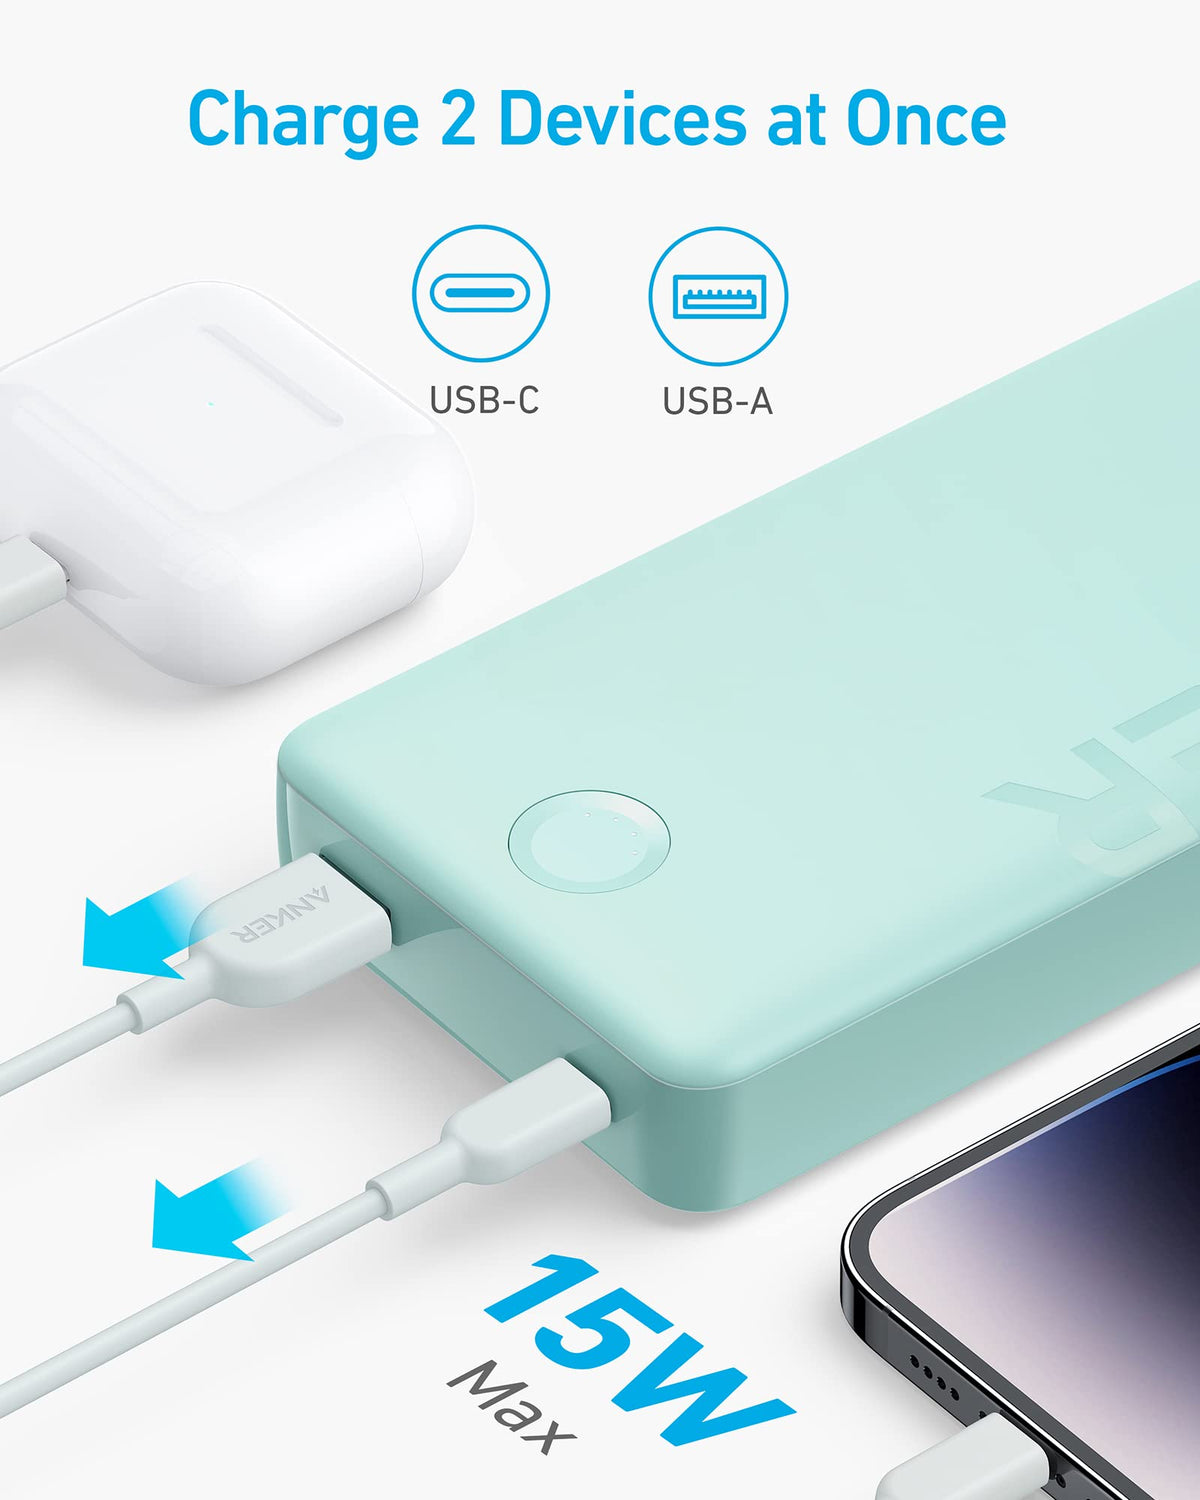 Anker 20K Power Bank with 2-Port